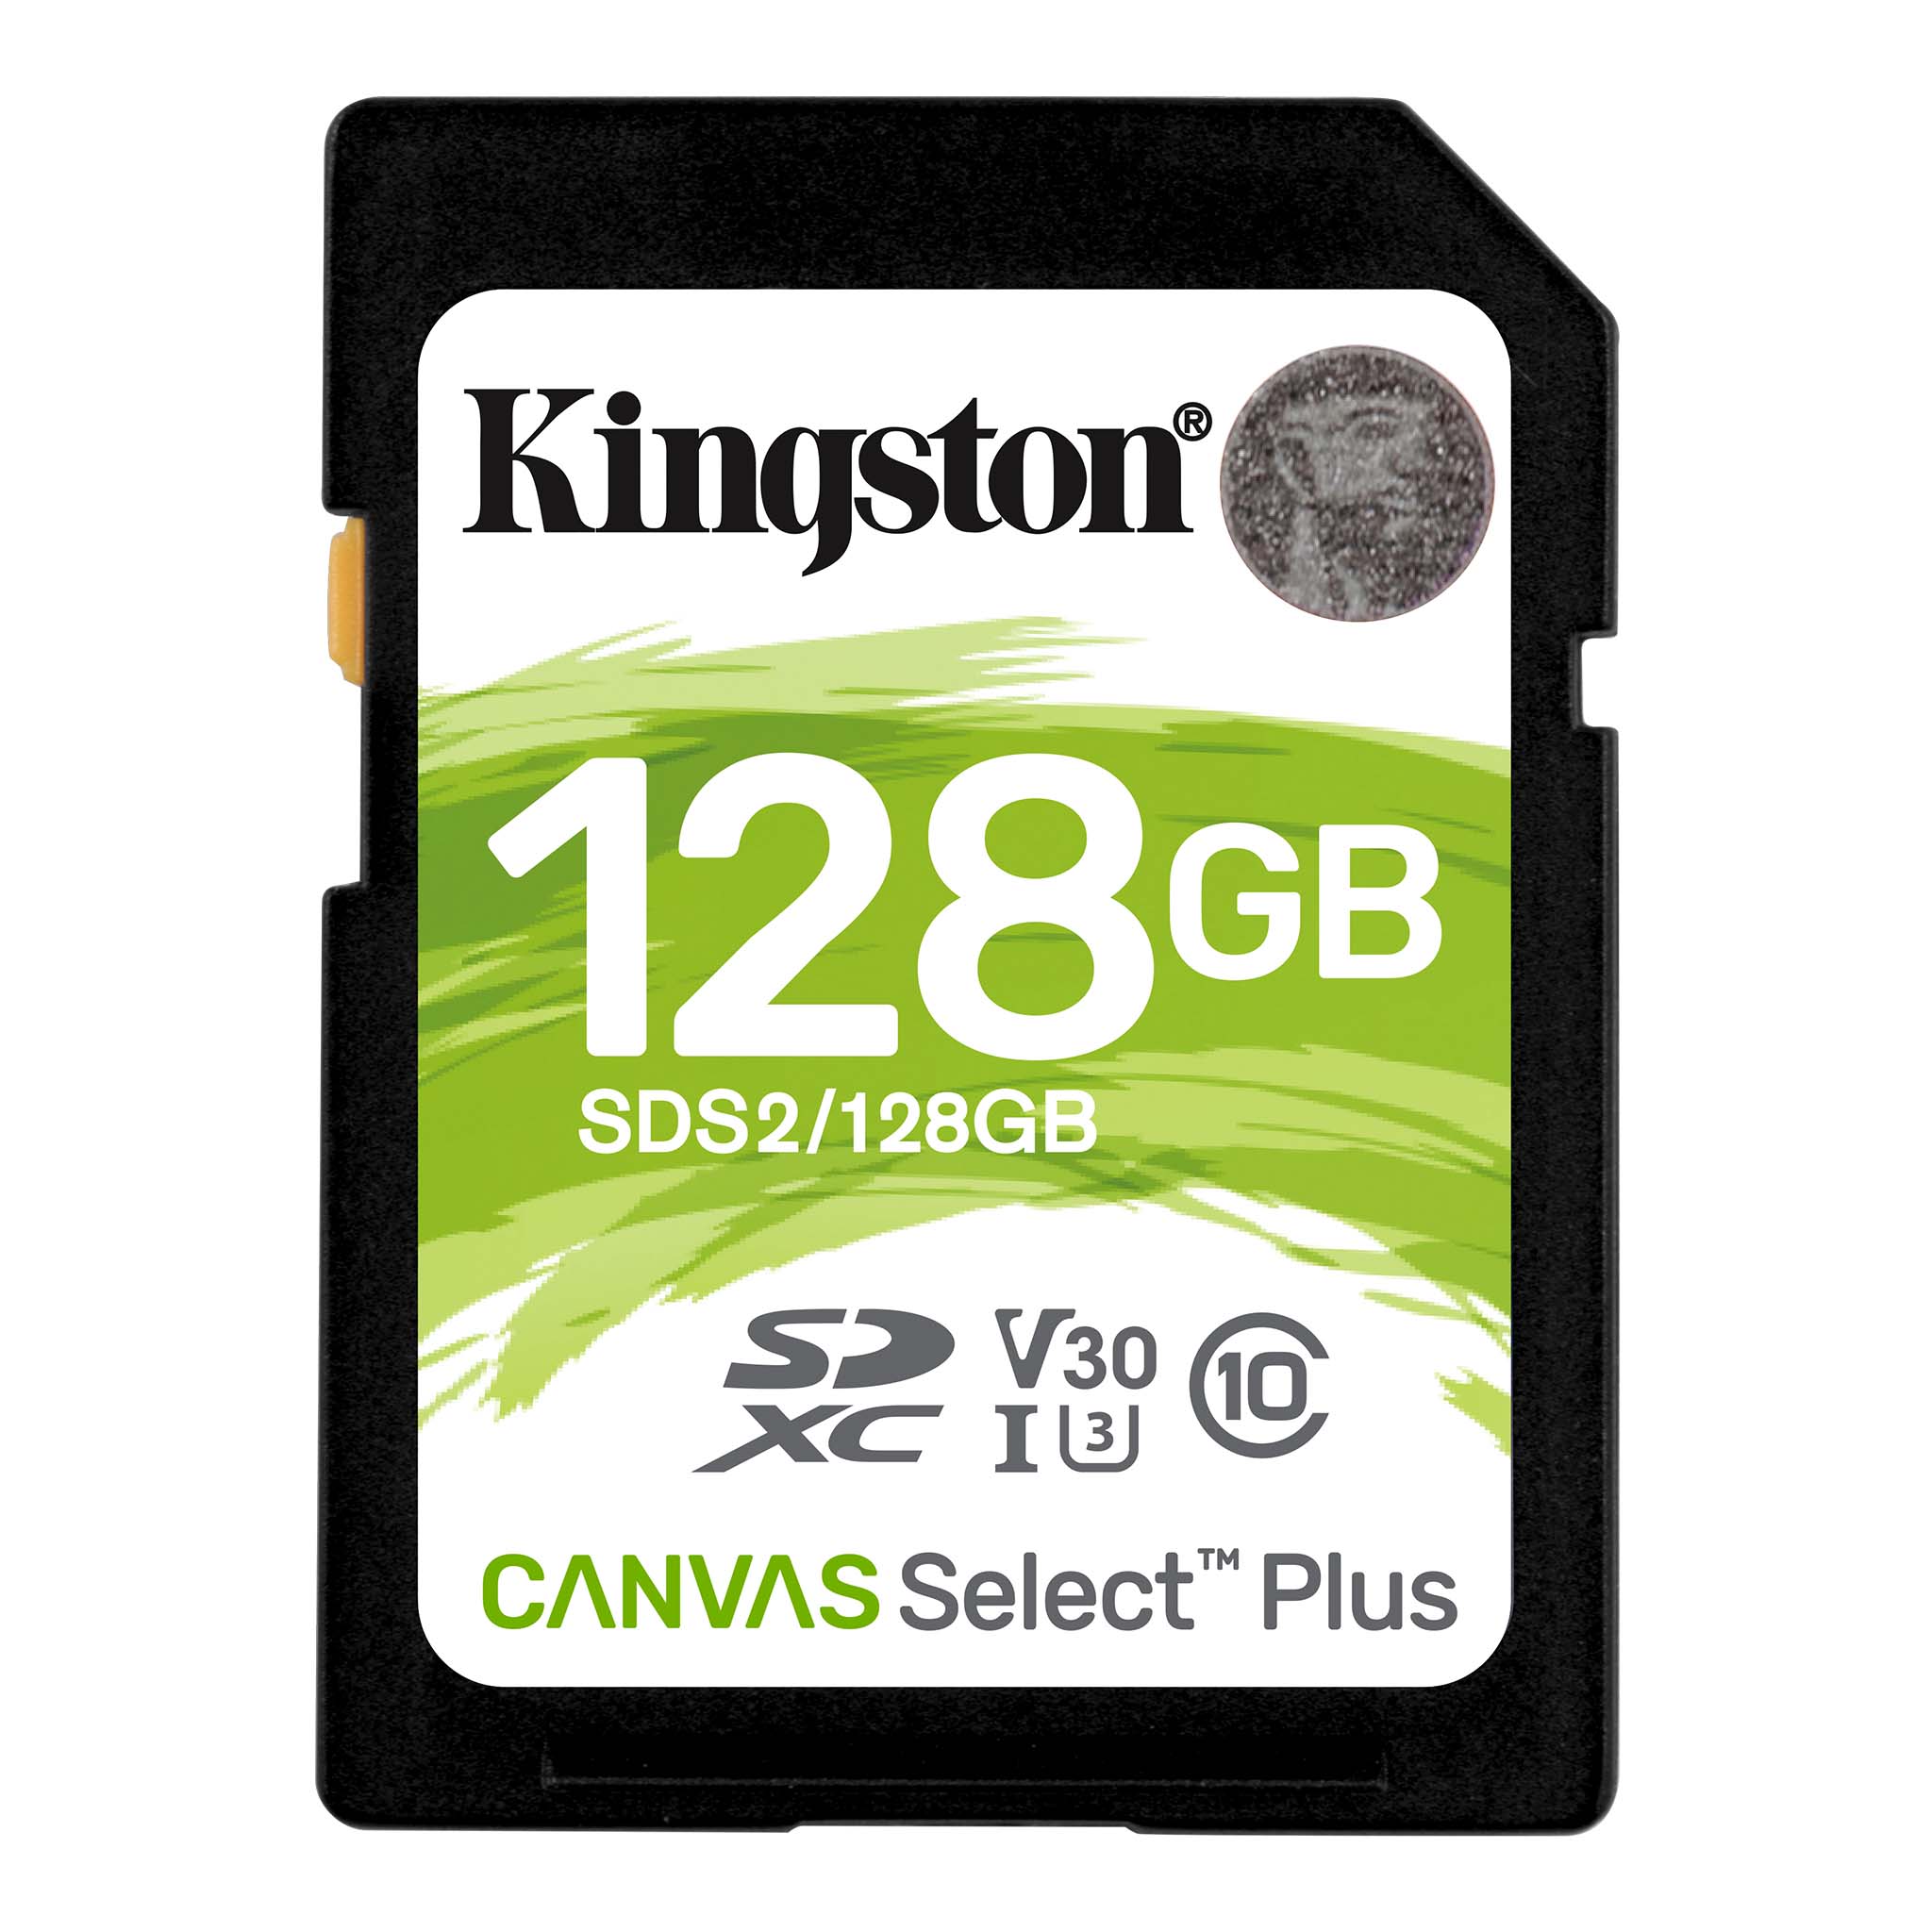 90MBs Works for Kingston Kingston Industrial Grade 32GB Celkon Campus A359 MicroSDHC Card Verified by SanFlash.